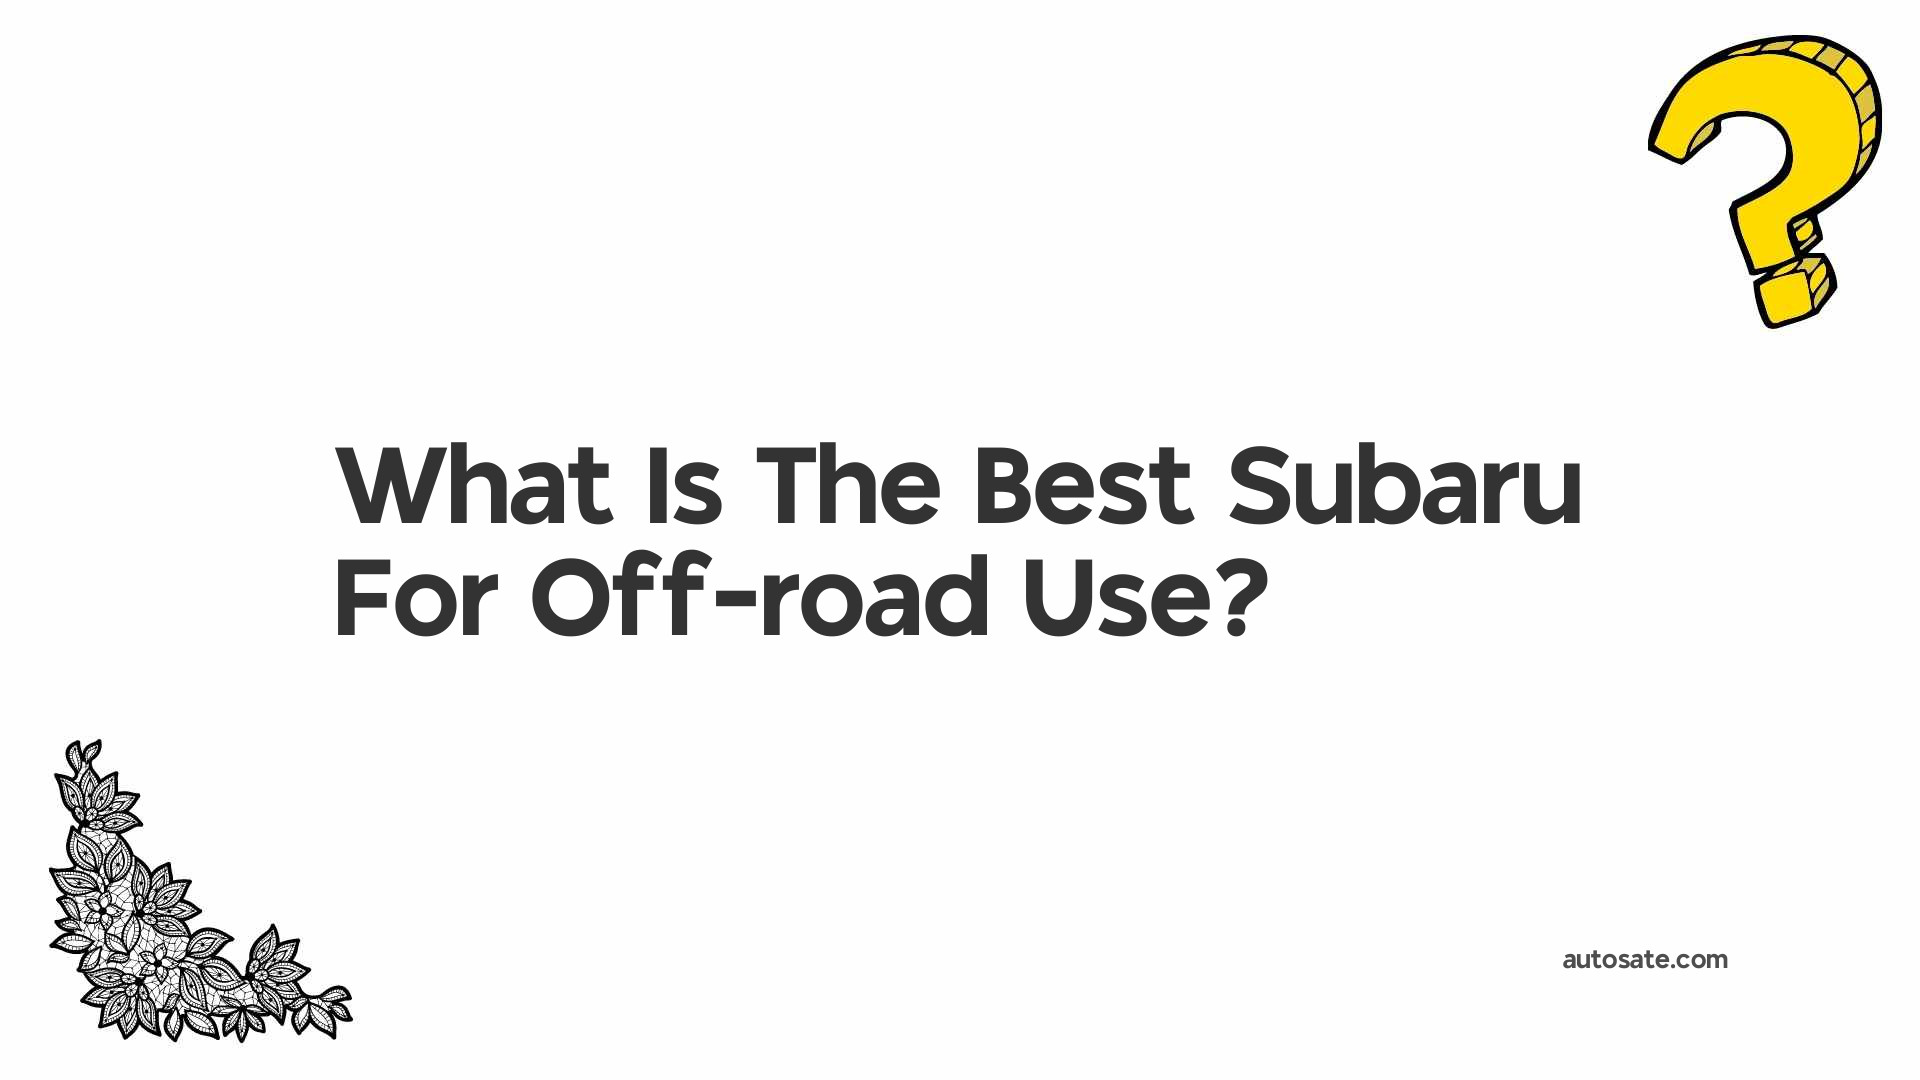 What Is The Best Subaru For Off-road Use?